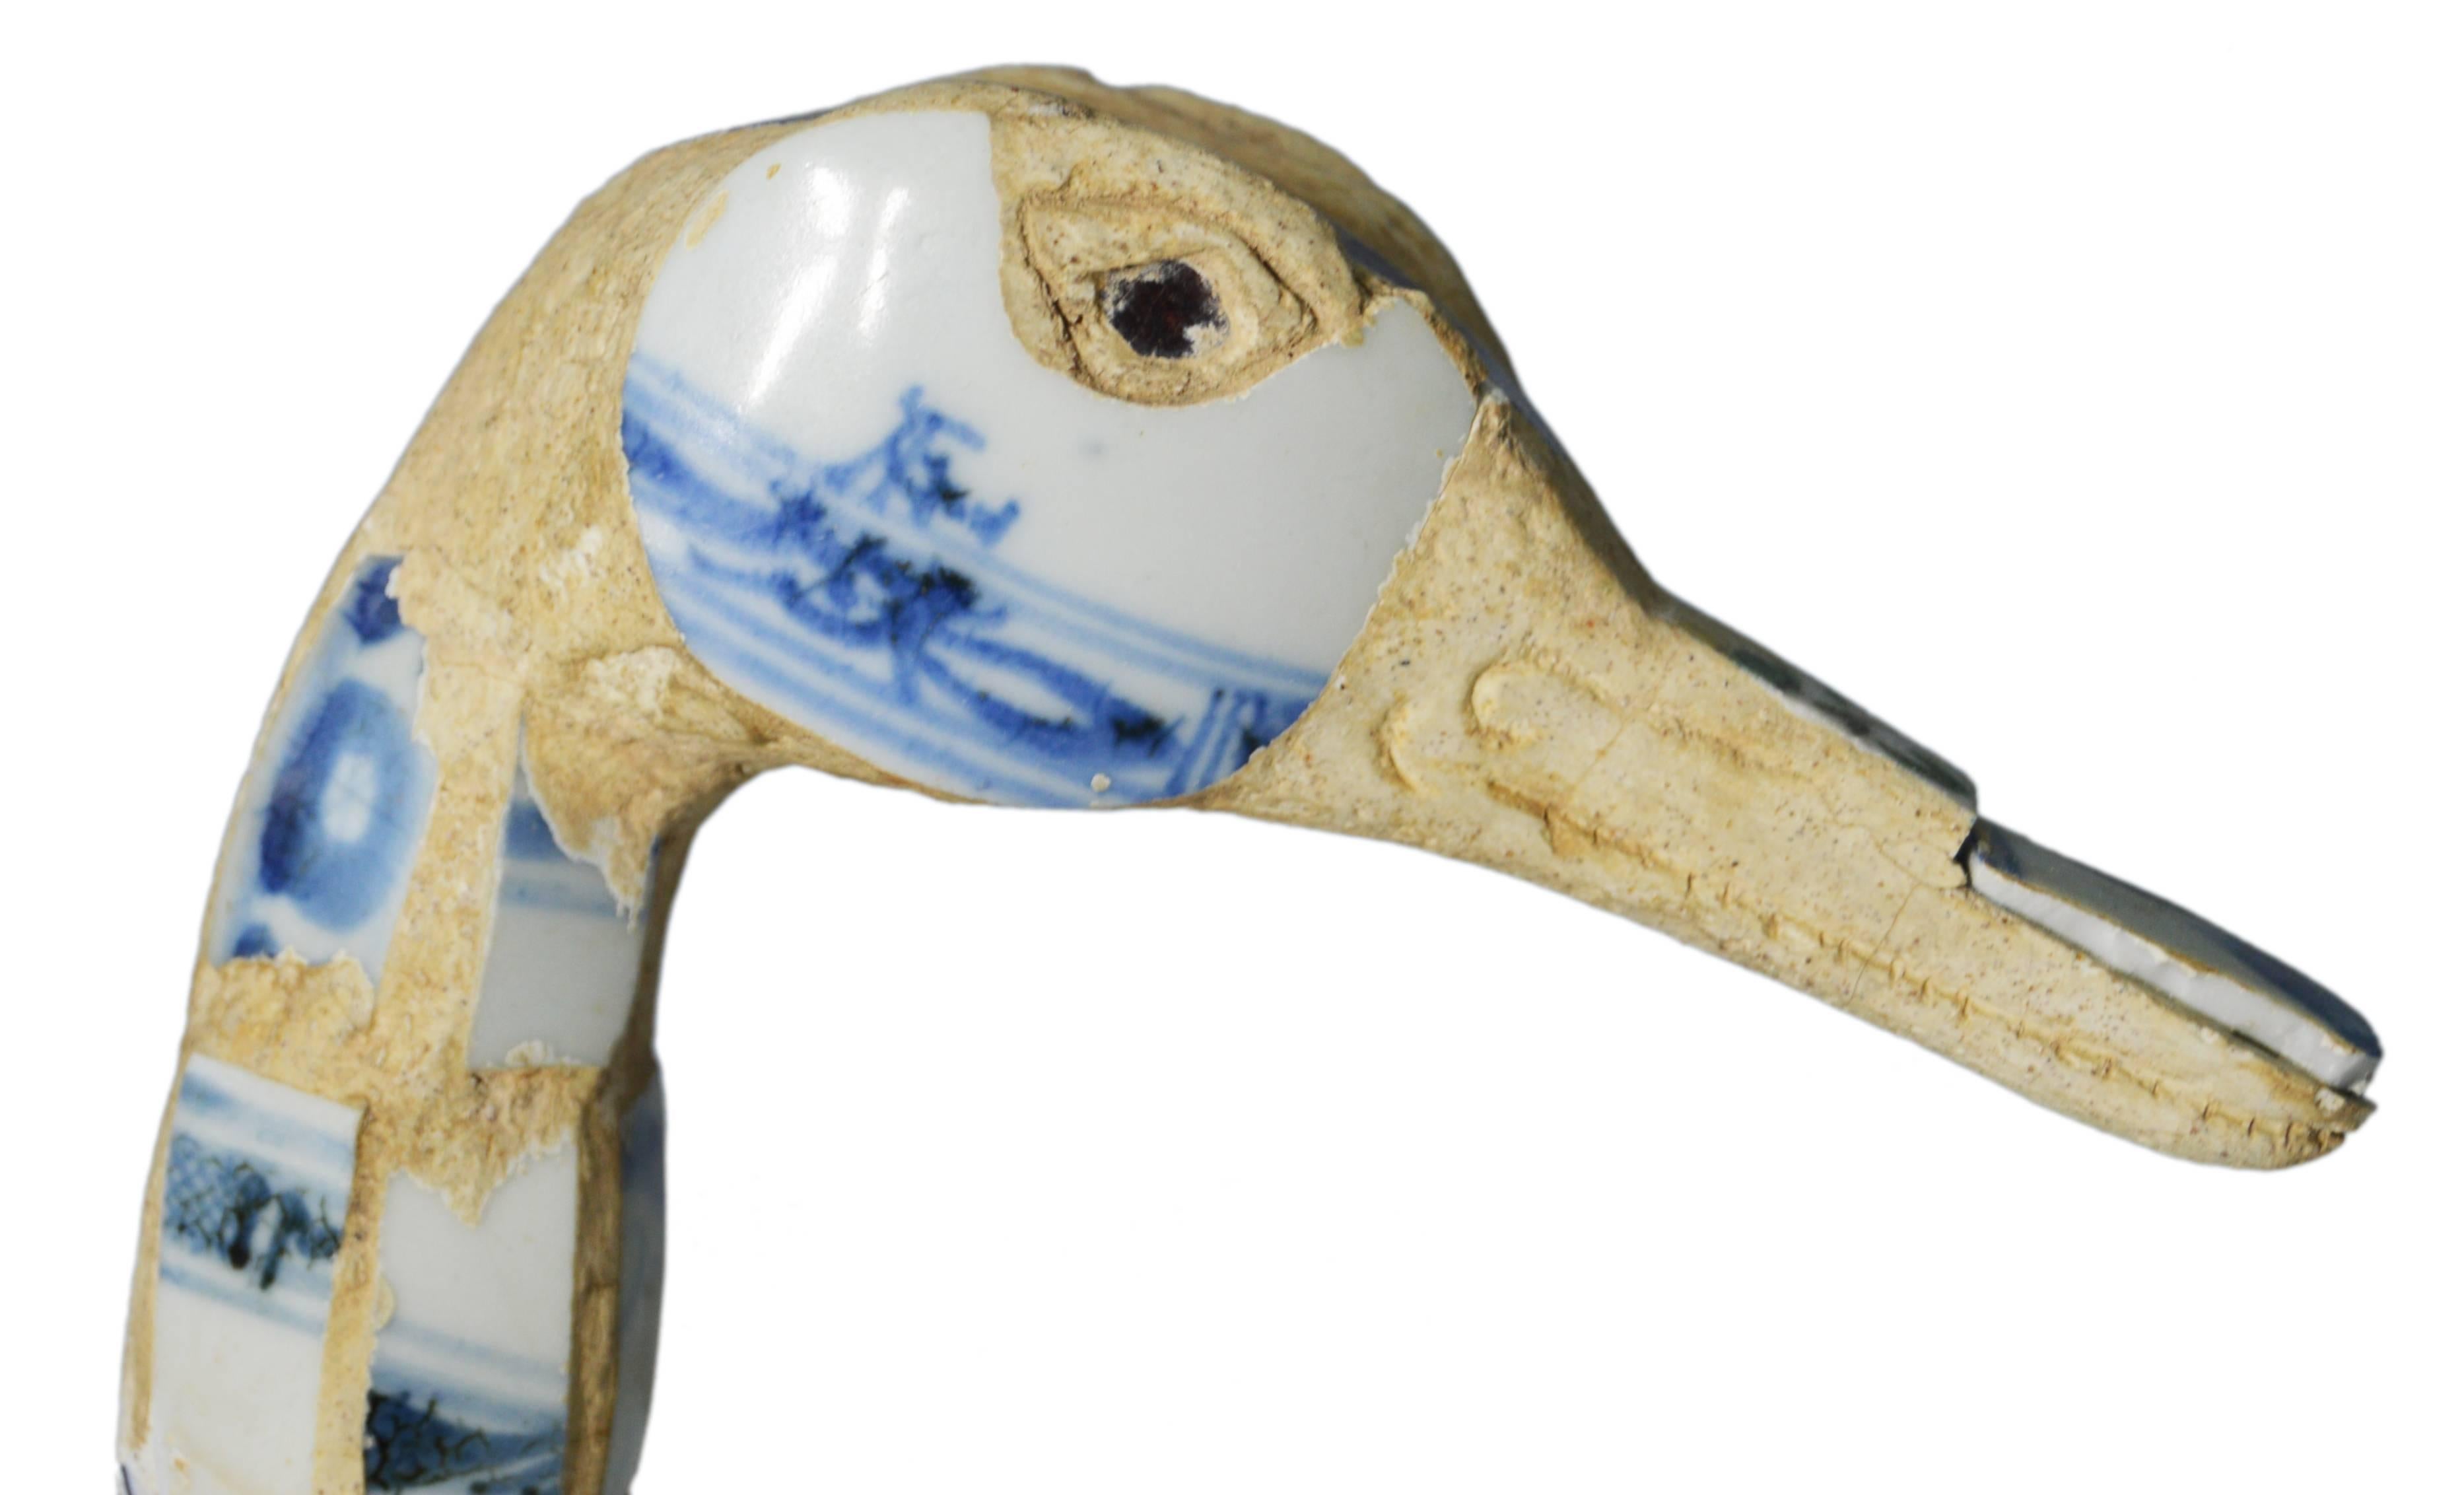 Vintage Chinese Faience Duck Sculpture with Blue Oriental Accents In Good Condition For Sale In Yonkers, NY